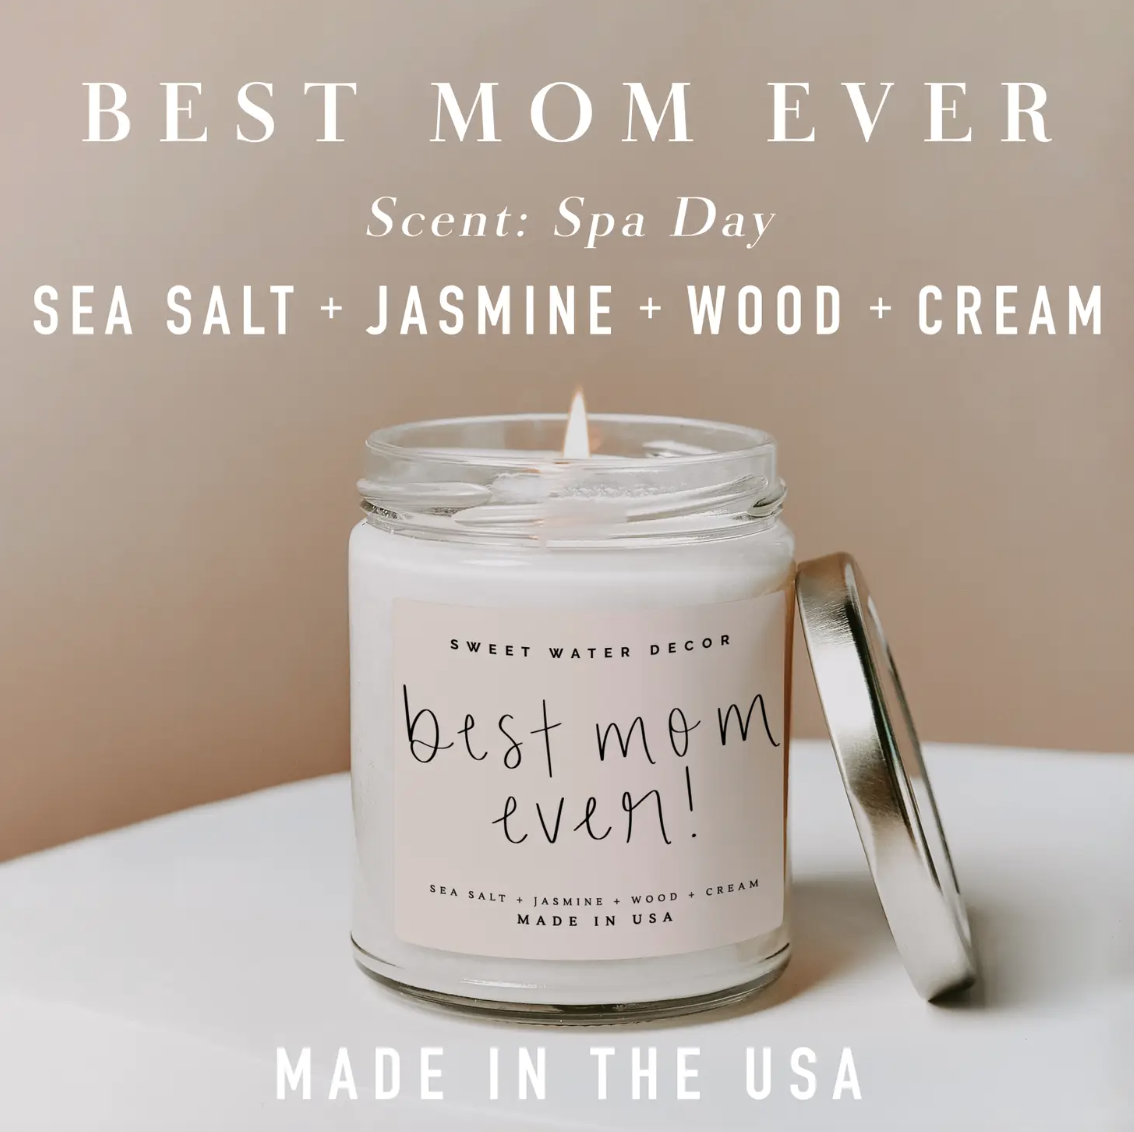 Sweet Water Decor Best Mom Ever! Soy Candle - Clear Jar - 9 oz